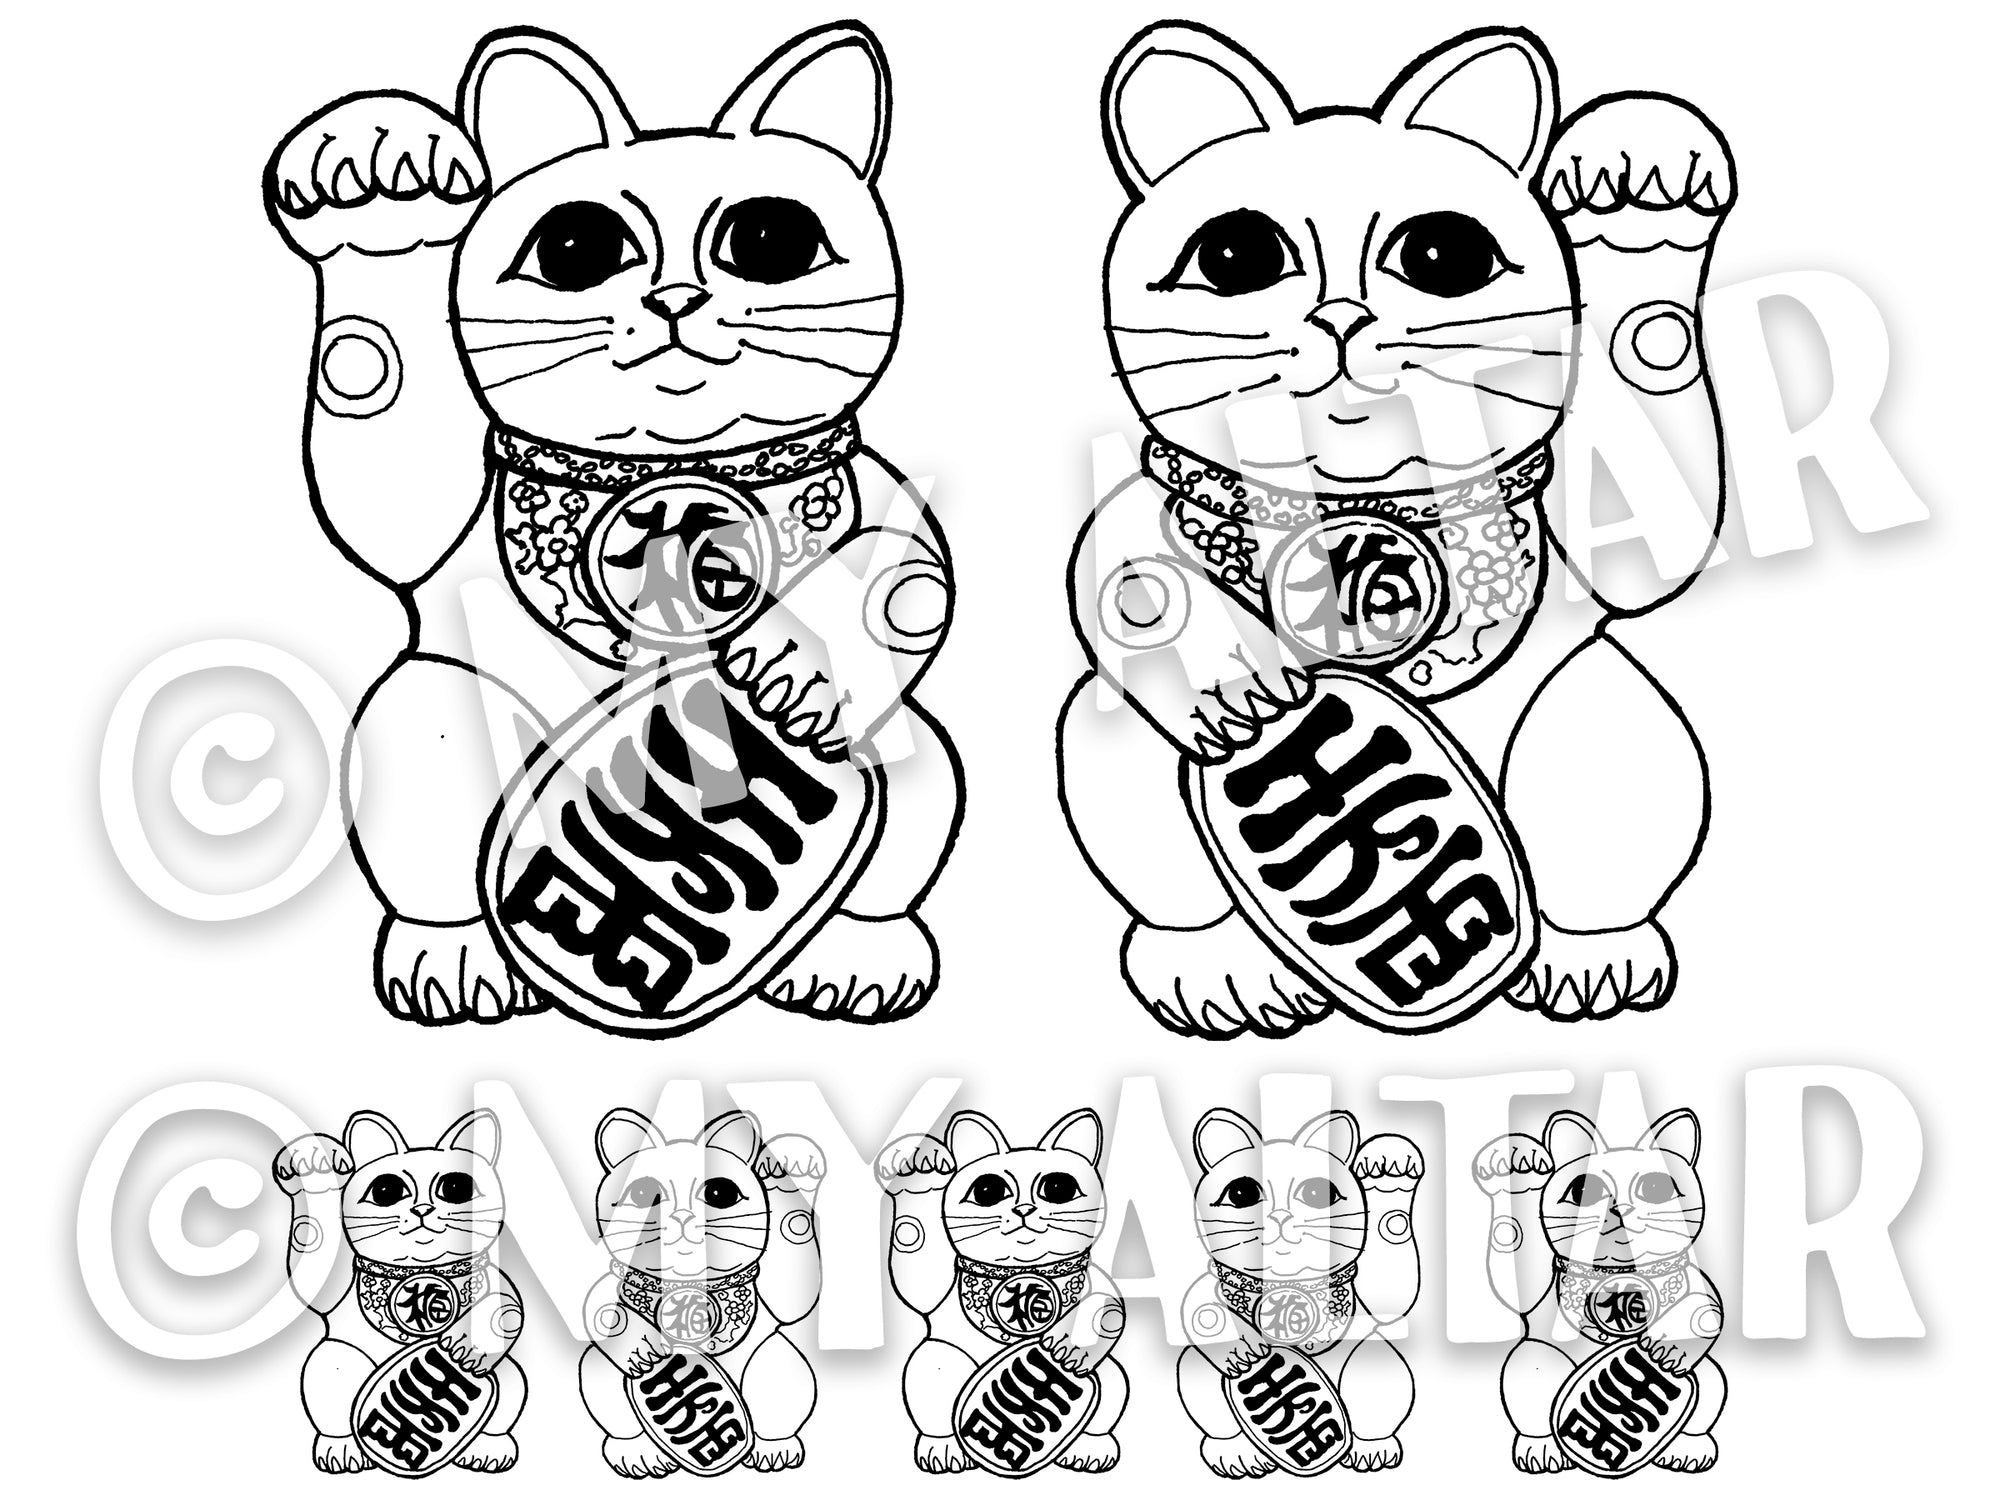 Set of 2 Large Black 5" Lucky Cat Maneki Neko Left and Right Paw for Home, Business, Career Wealth and Success Sigil Waterproof Temporary Tattoos